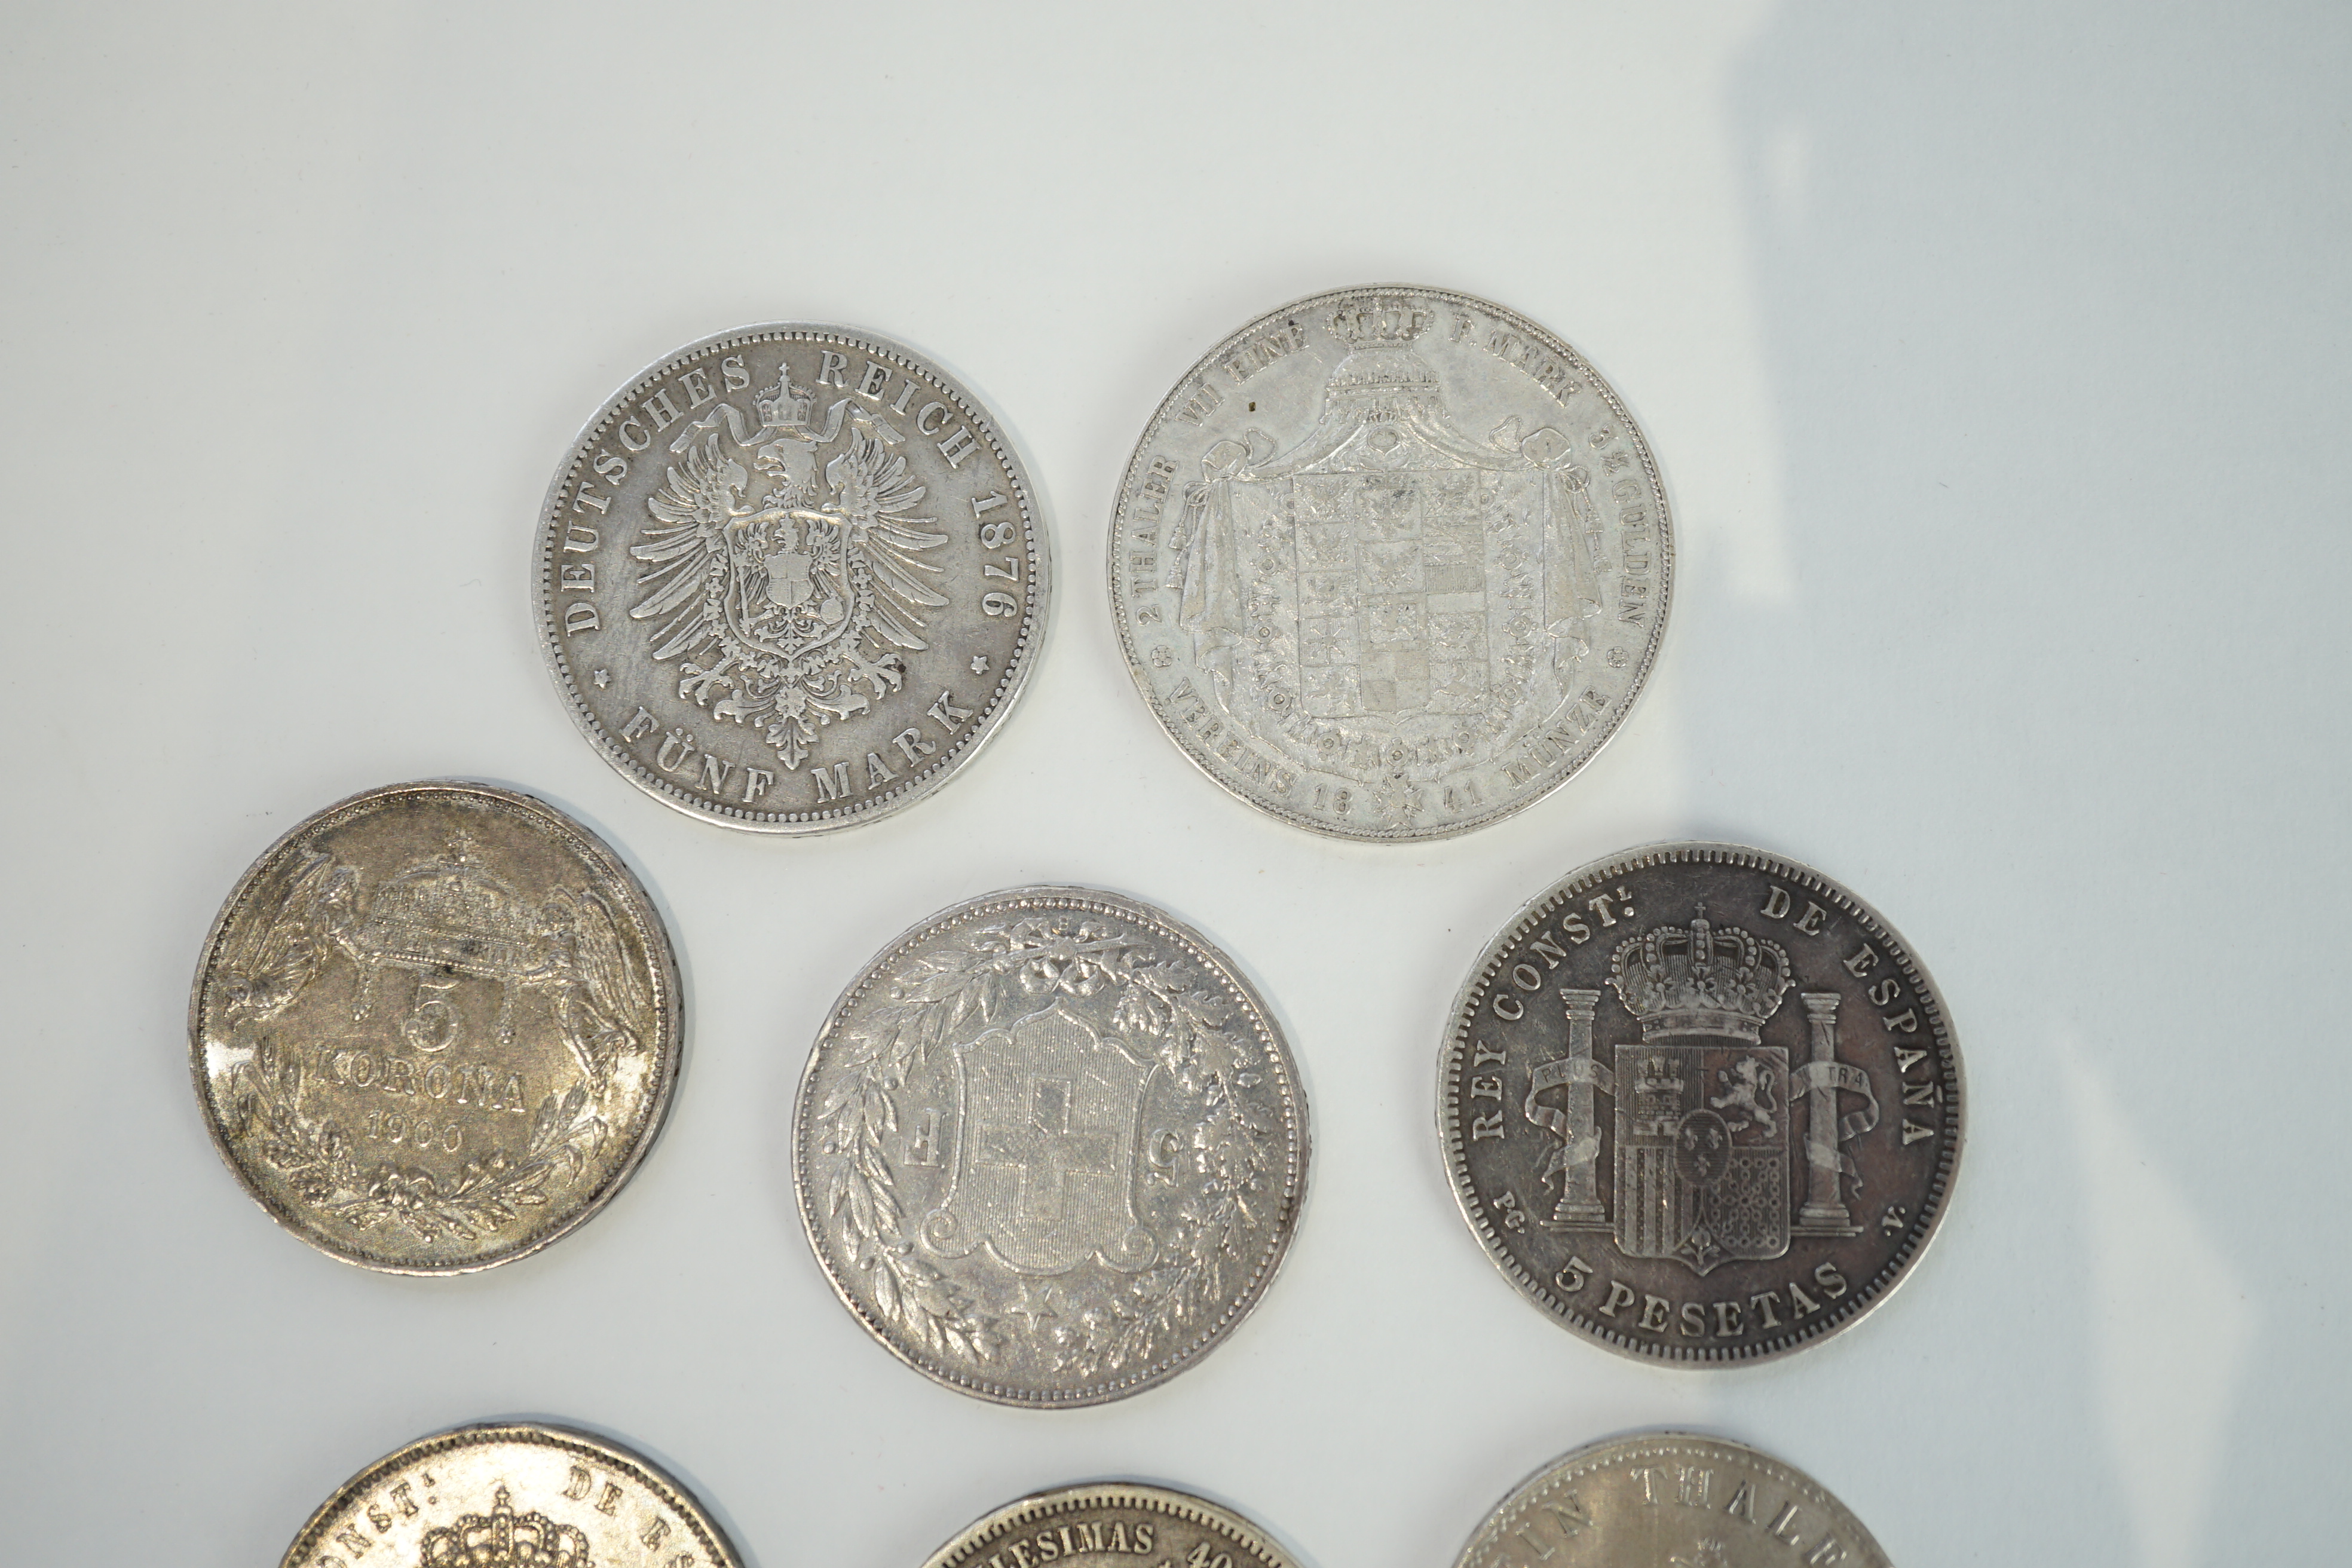 European coins, 18th - 20th century, including German states – Prussia, 1817A one Thaler, 1841A five marks, 1876B five marks, Switzerland, 1890 five francs, Austrian empire, 1900KB five korona, Spain 1871 five pesetas, 1